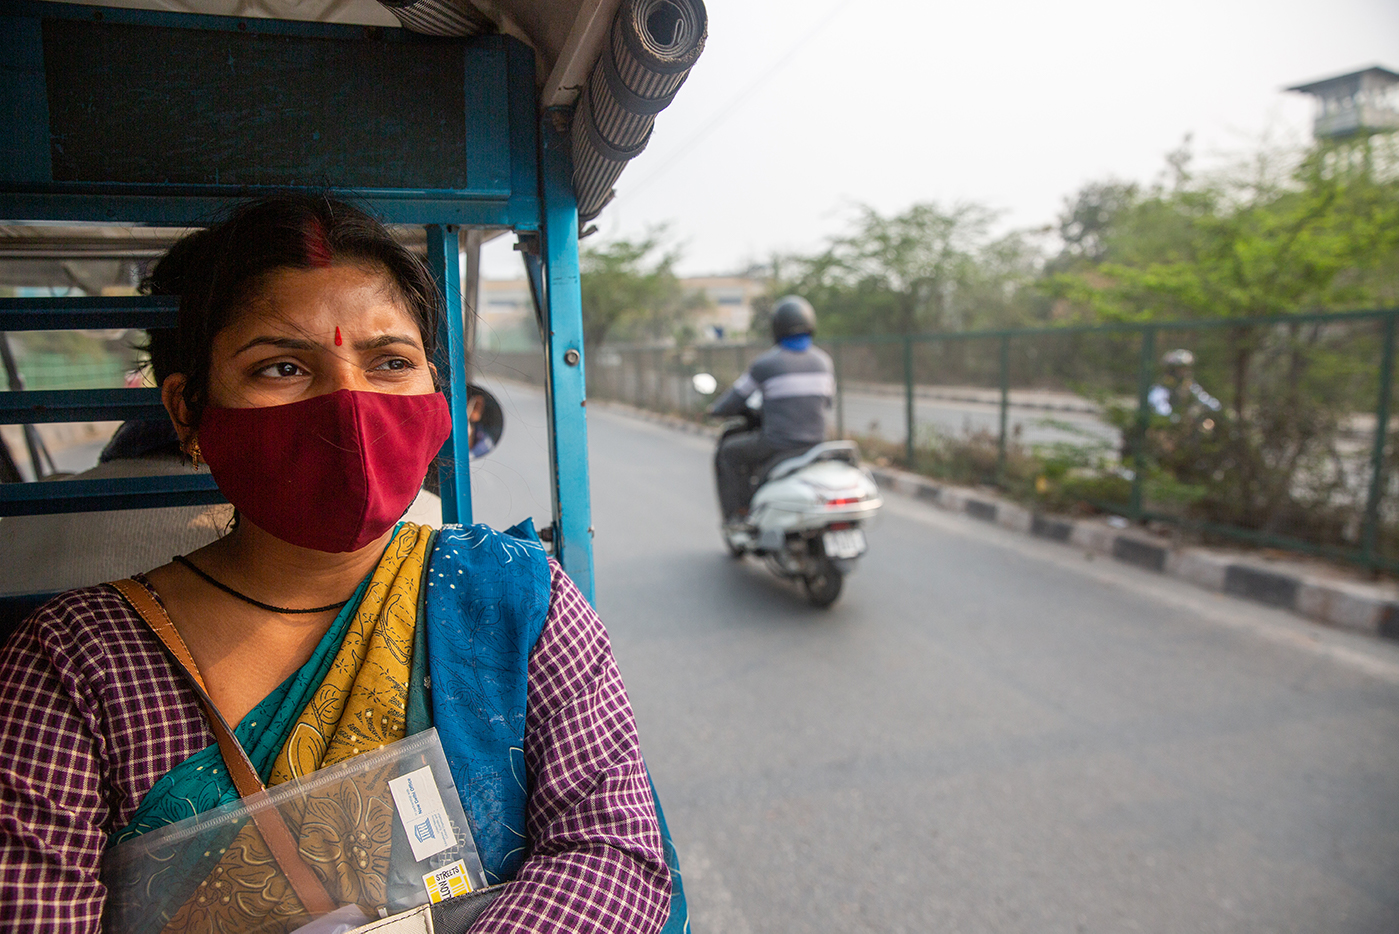 ©Gates Archive/Mansi Midha / Caption: Sangam Devi makes her way home in an auto rickshaw after attending a teachers training program  in New Delhi, India on February 18, 2021. Sangam's new employment status has given her great encouragement and confidence to go about her daily life.